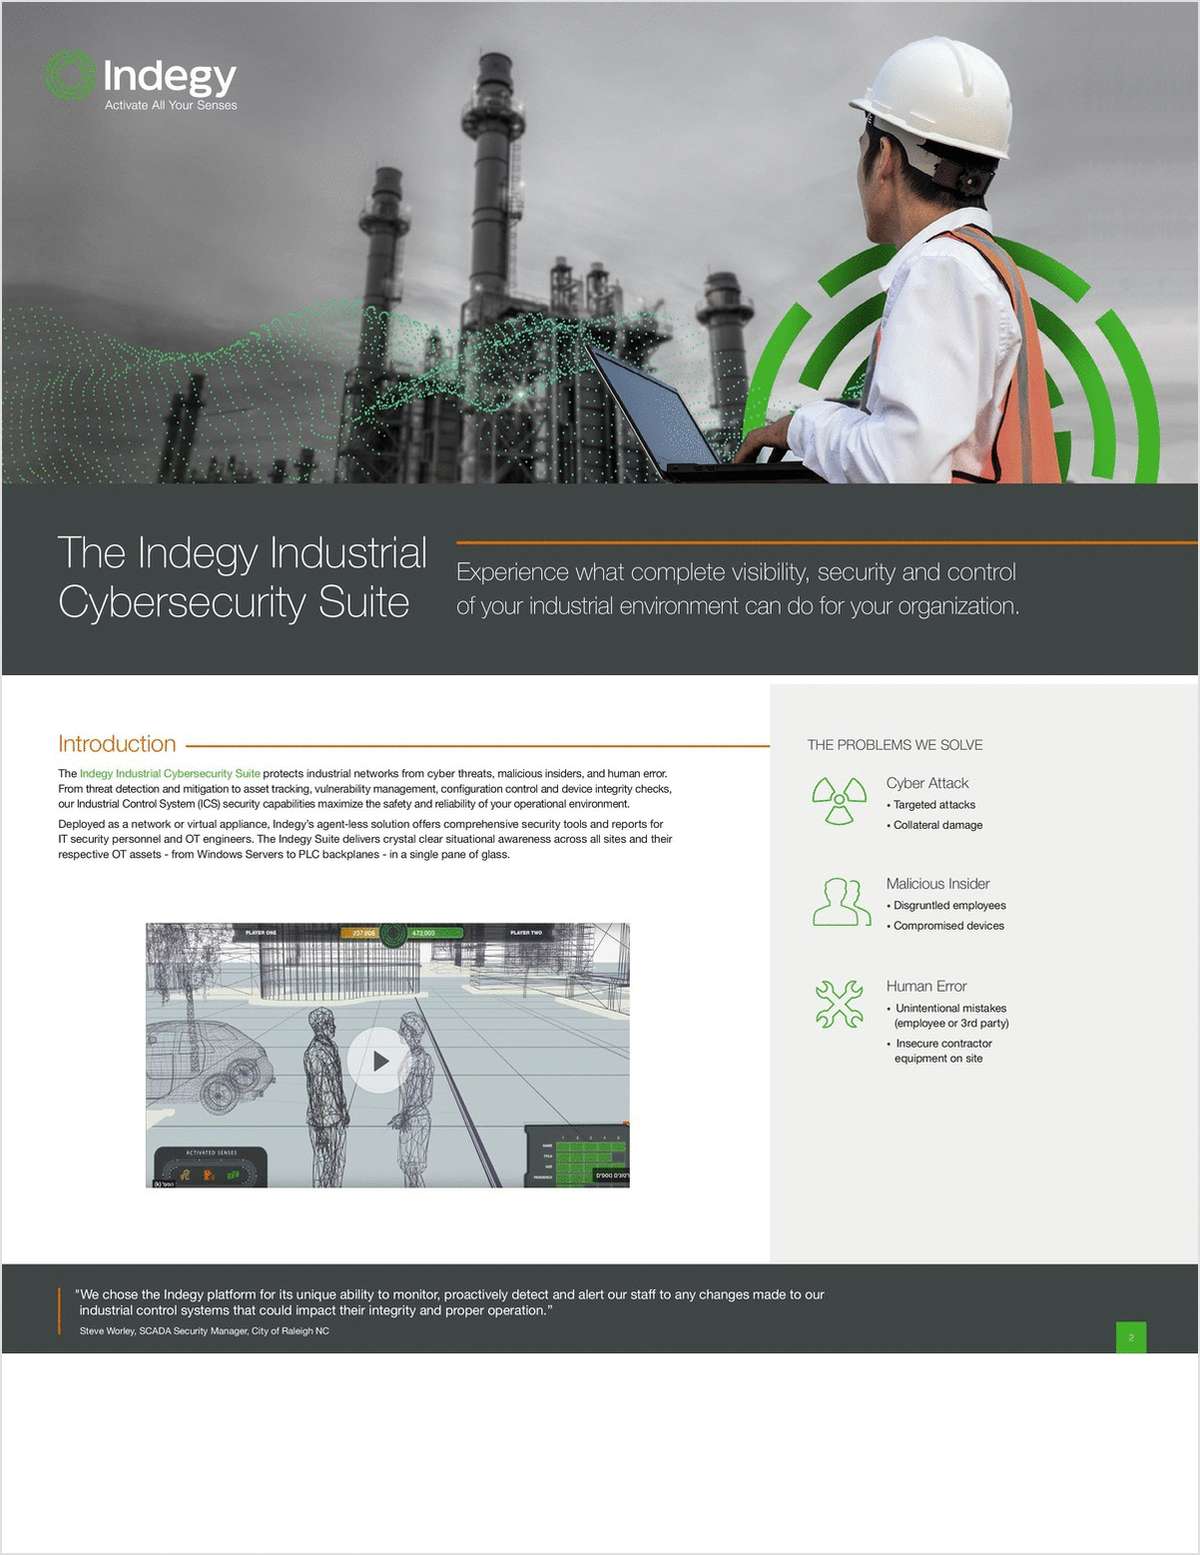 The Indegy Industrial Cybersecurity Suite